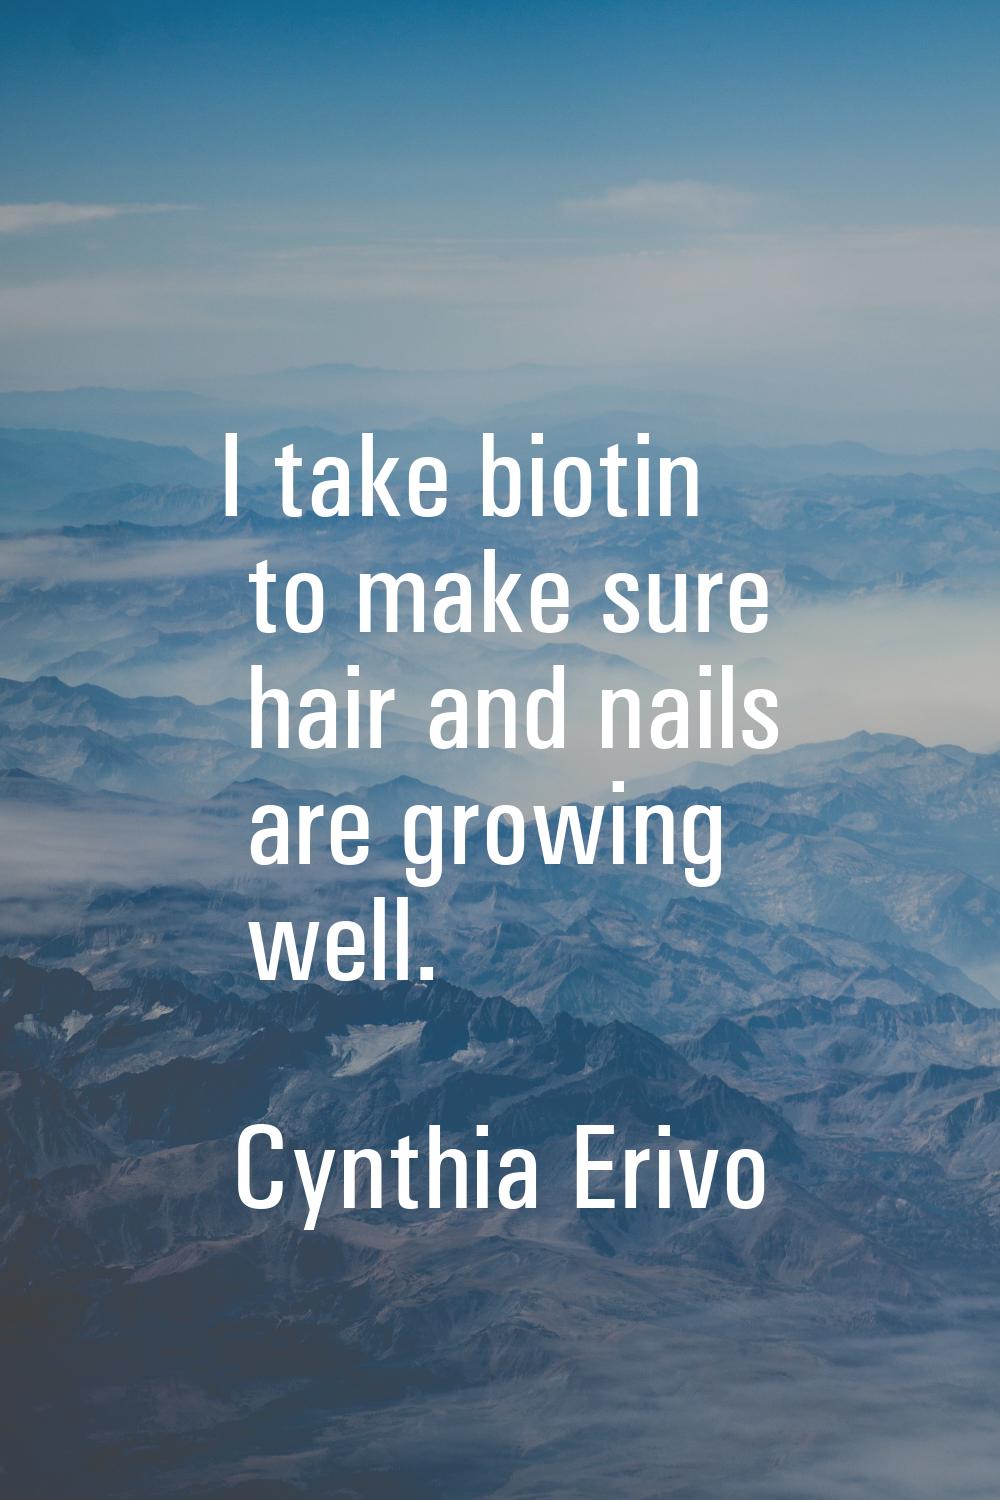 I take biotin to make sure hair and nails are growing well.